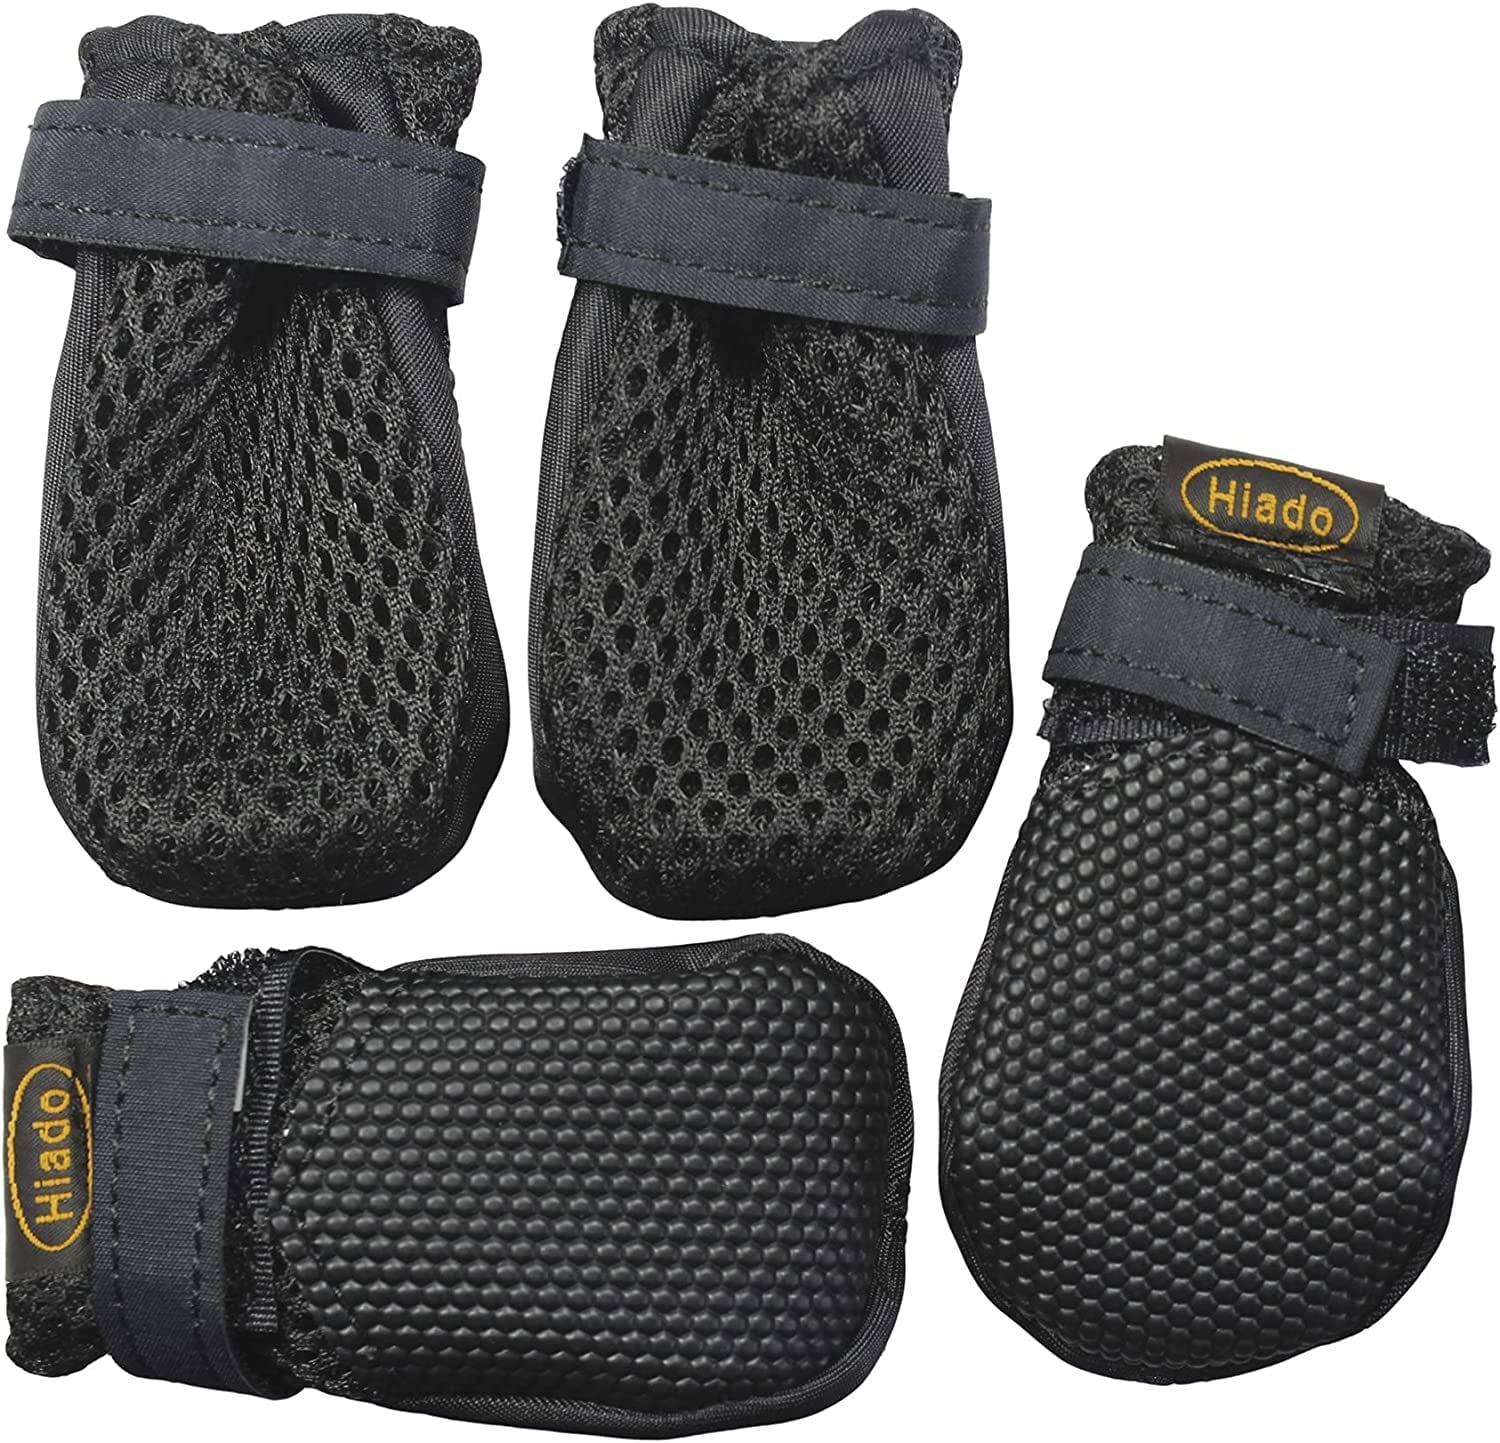 Hiado Dog Shoes Boots with Mesh Nonslip Rubber Soles to Protect Hardwood Floor and Prevent Scratching Licking Black XXS Animals & Pet Supplies > Pet Supplies > Dog Supplies > Dog Apparel Hiado Black Size XXS Inner Sole: 1.8"x1.6" 